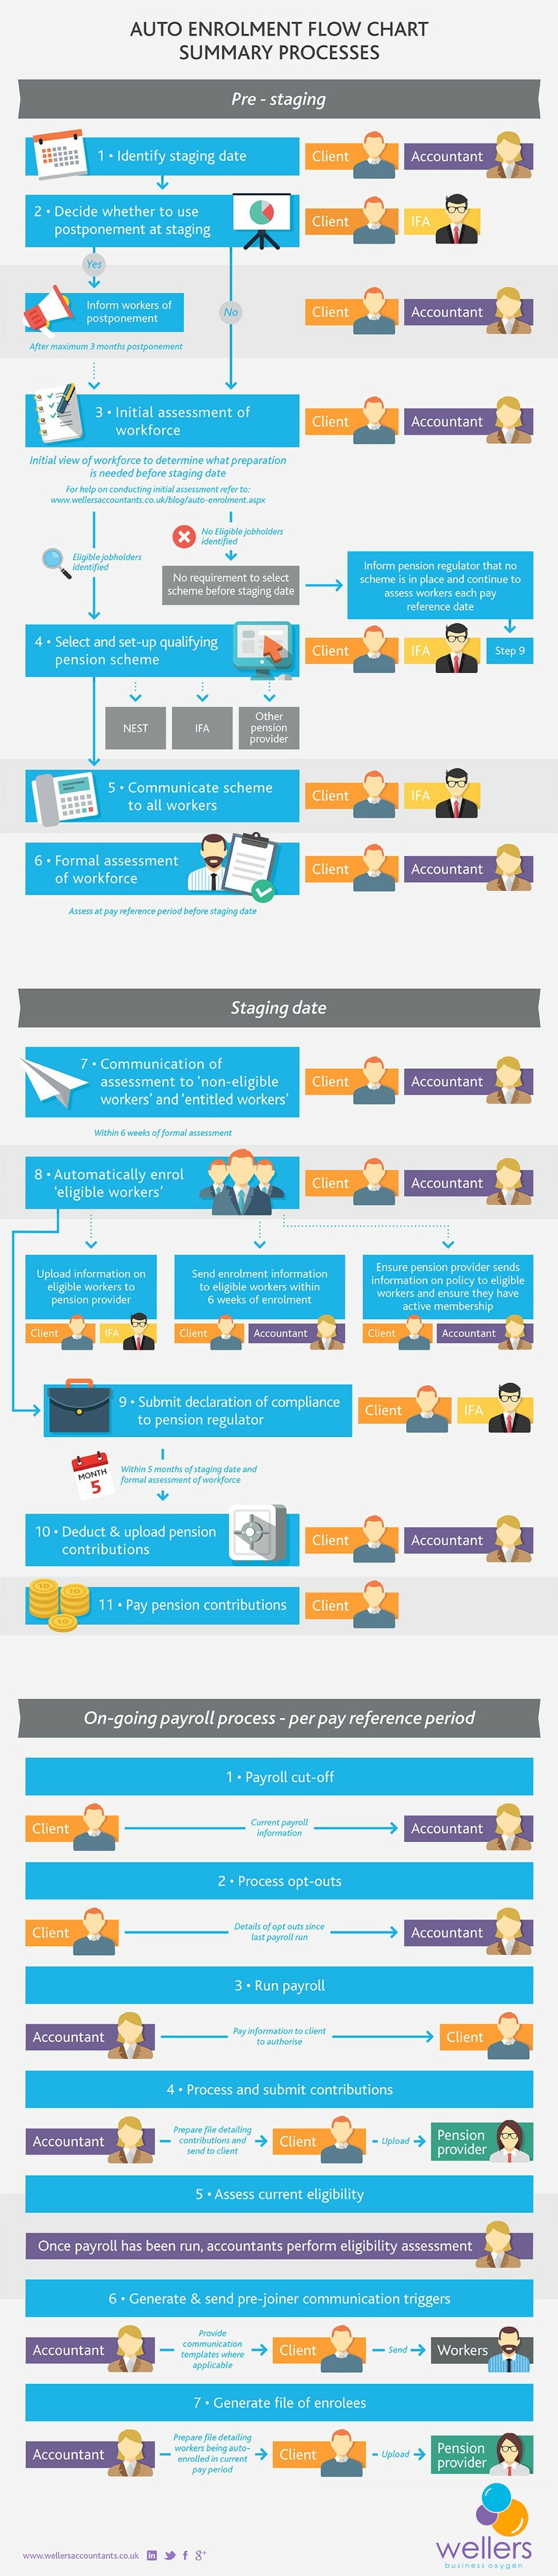 Infographic for the qualifying pension scheme auto enrolment